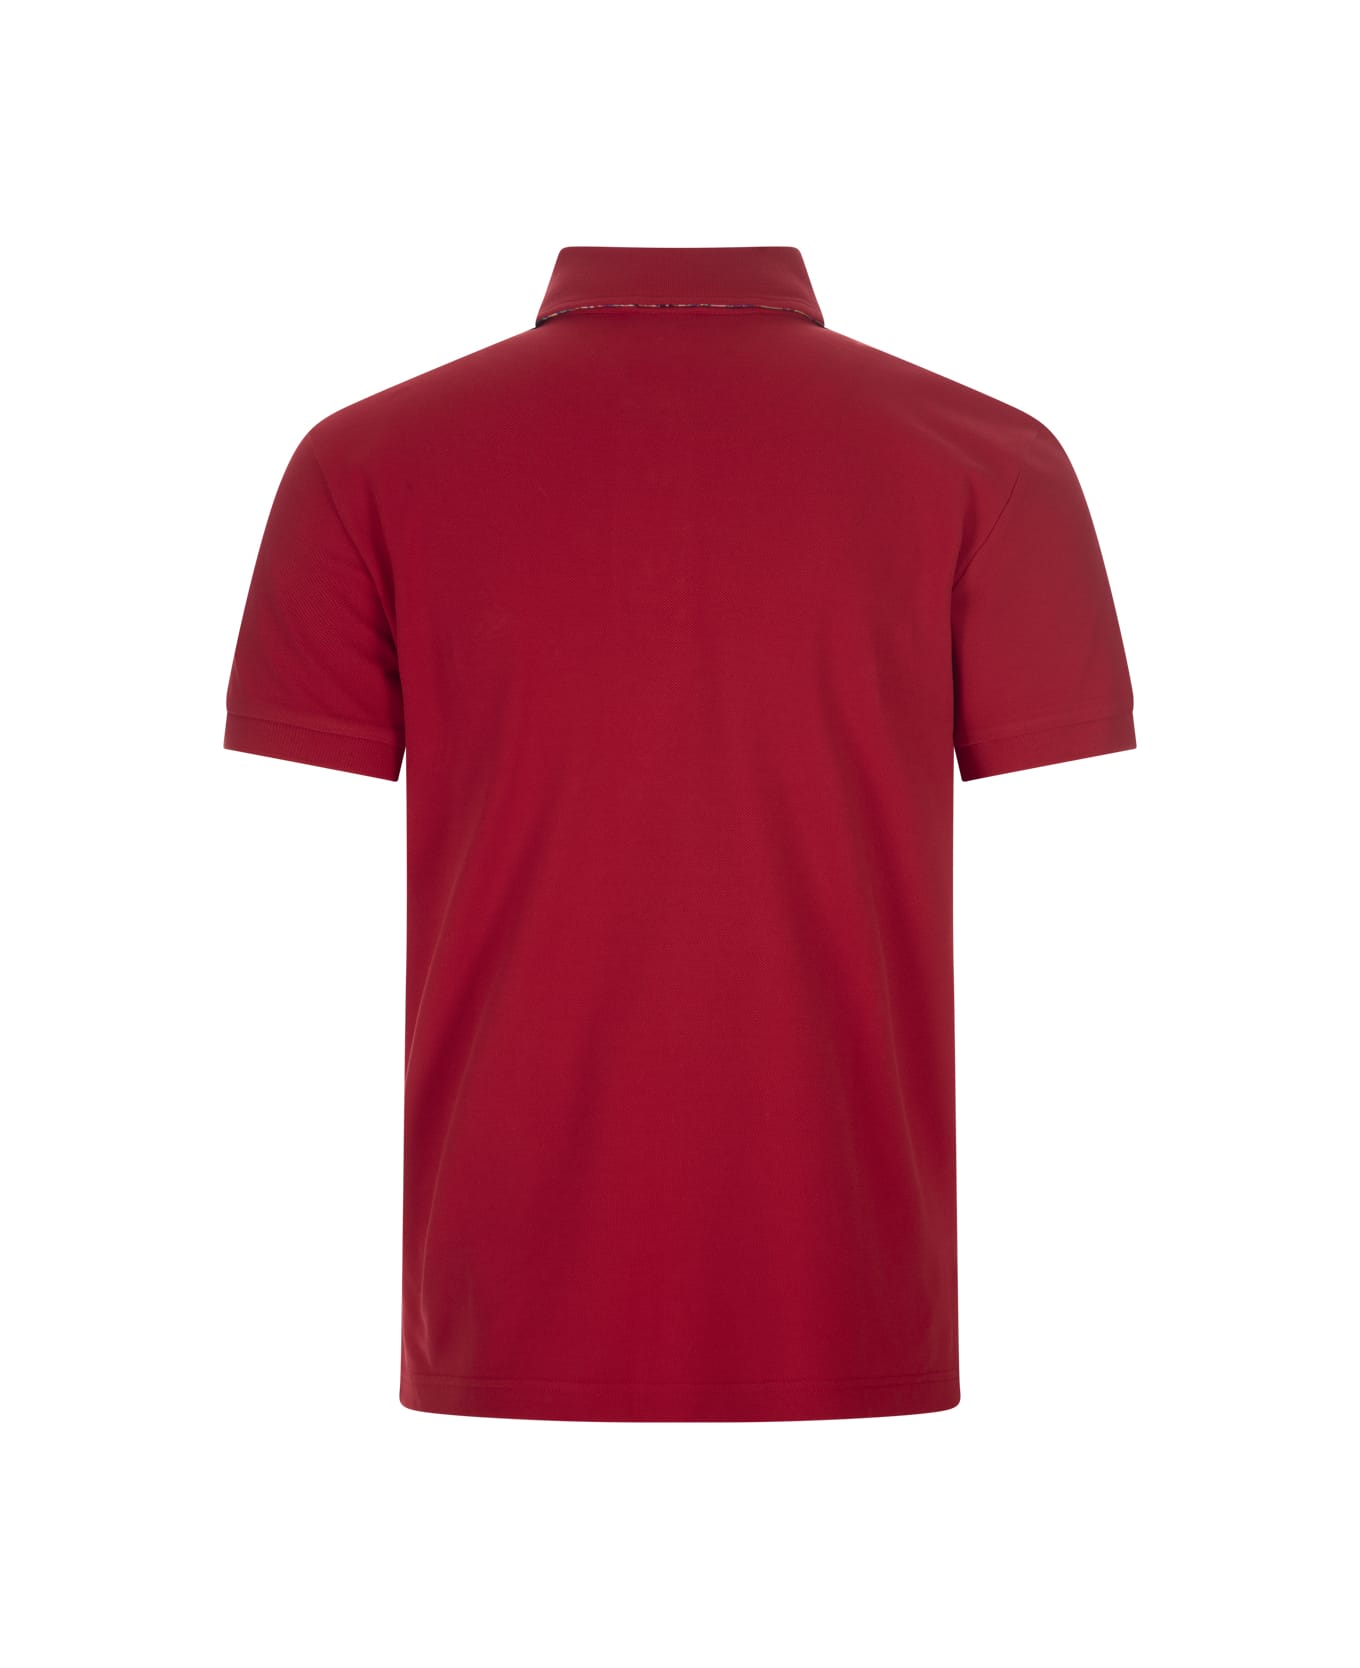 Etro Red Polo Shirt With Embroidered Pegasus - Red